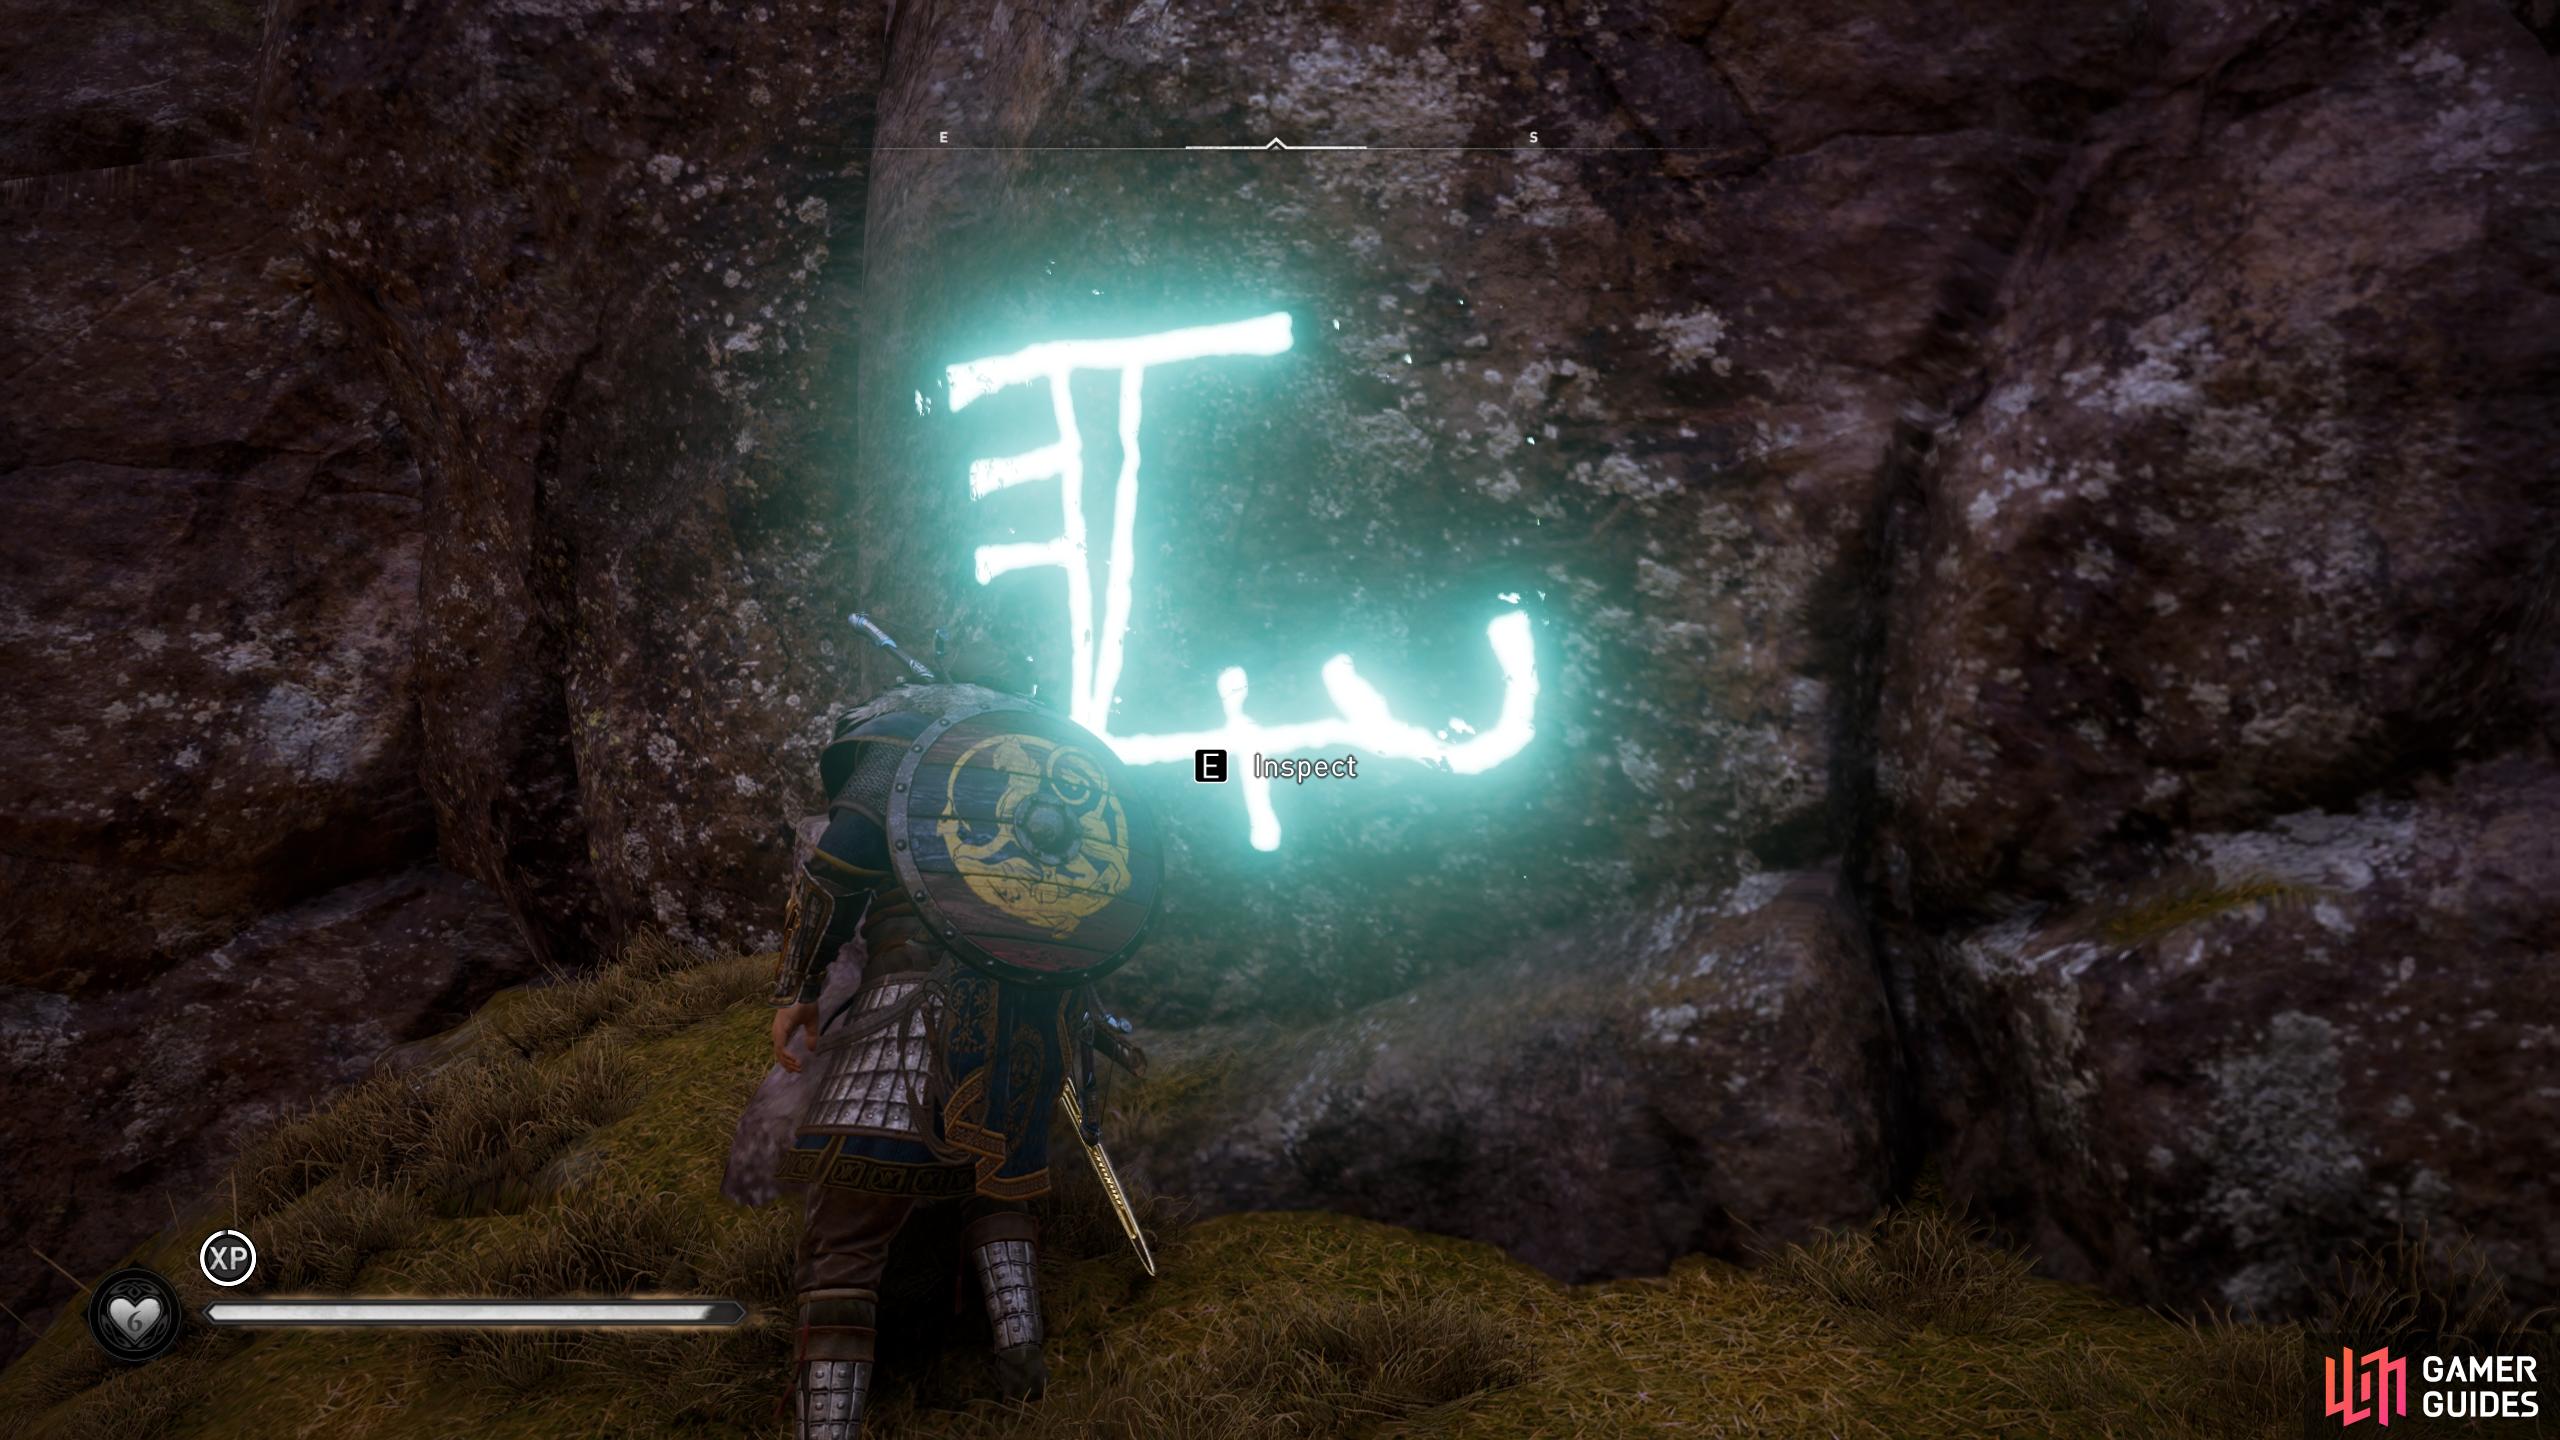 Use Odins Sight to highlight the runic inscription, then interact with it to reveal the entrance.